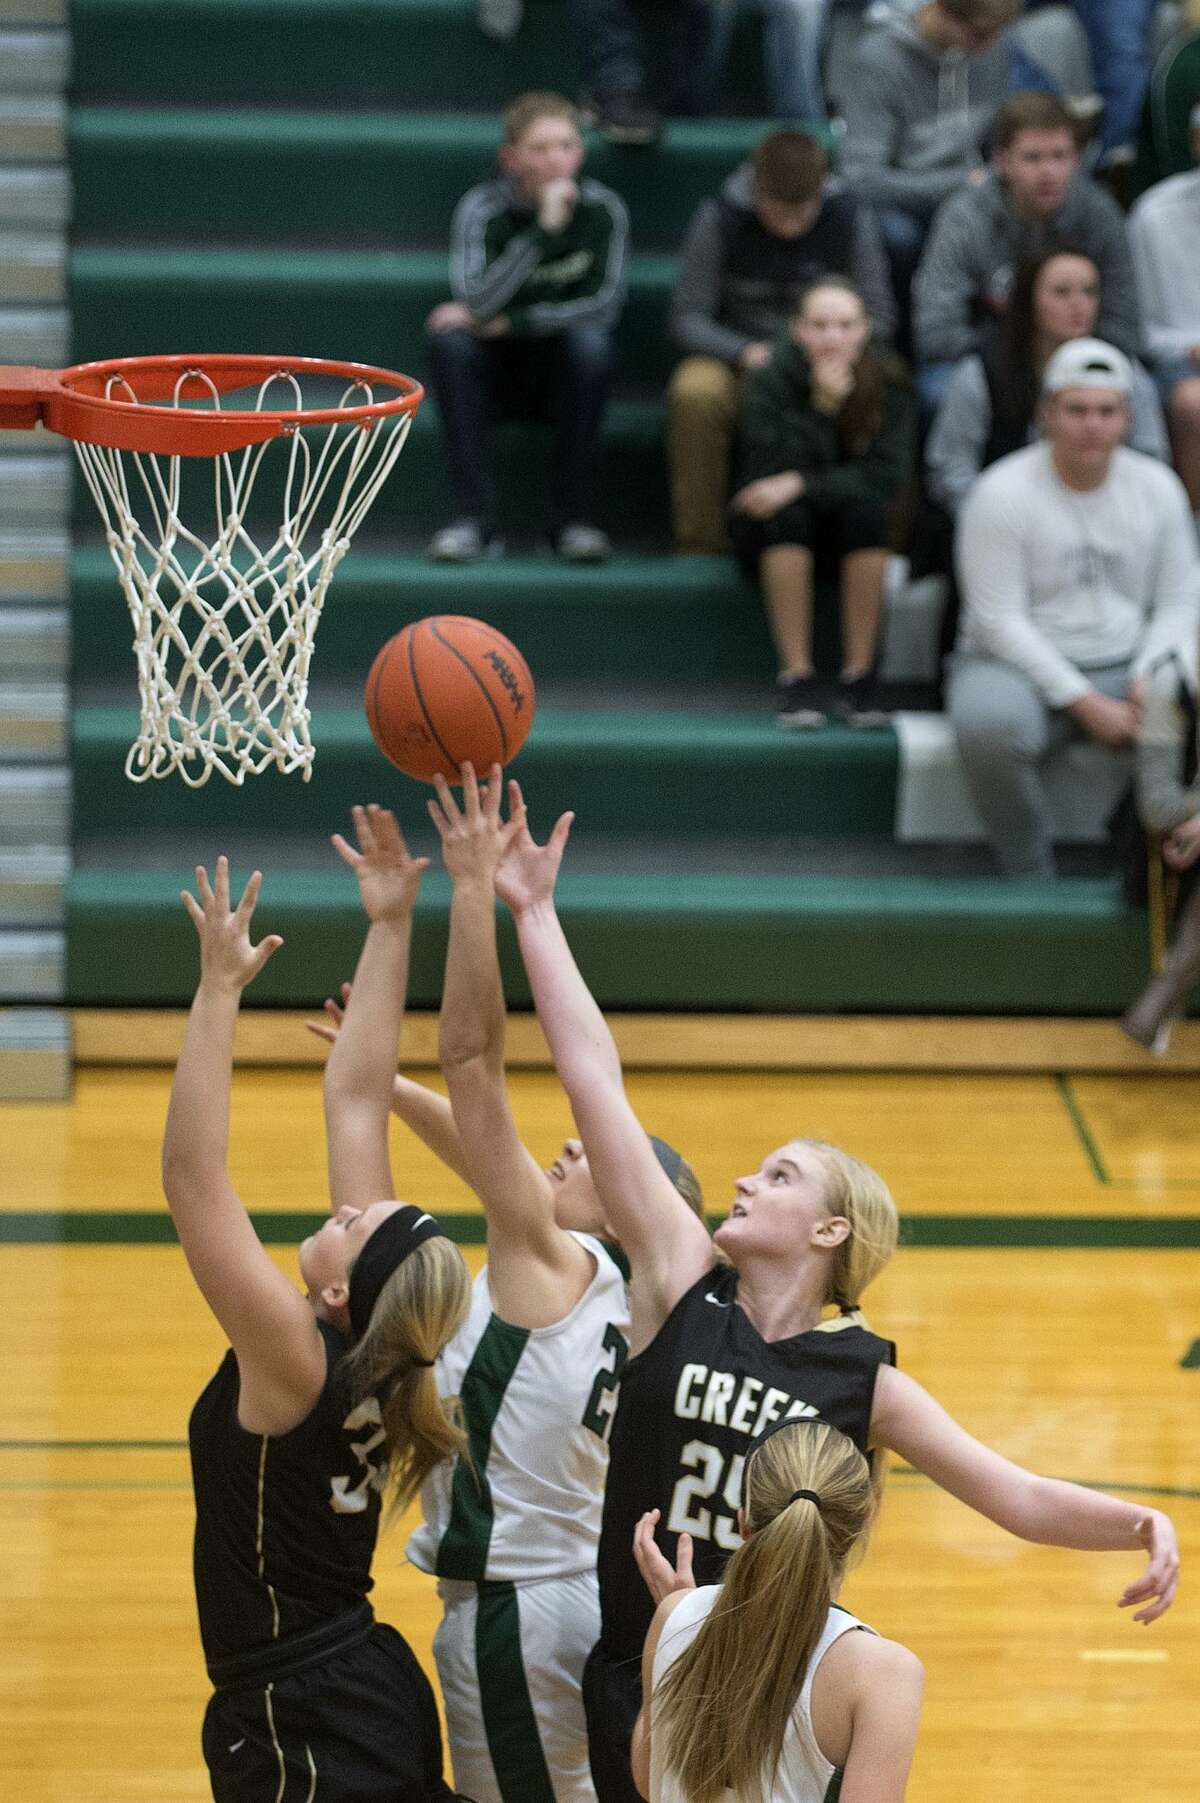 BRITTNEY LOHMILLER | blohmiller@mdn.net Bullock Creek's Mayson Barringer, left, and Haley Heldt work block Freeland's Mary Hemgesberg's lay-up in the second half of the Friday evening game at Freeland High School. Freeland defeated Bullock Creek 68-25 and remain undefeated.